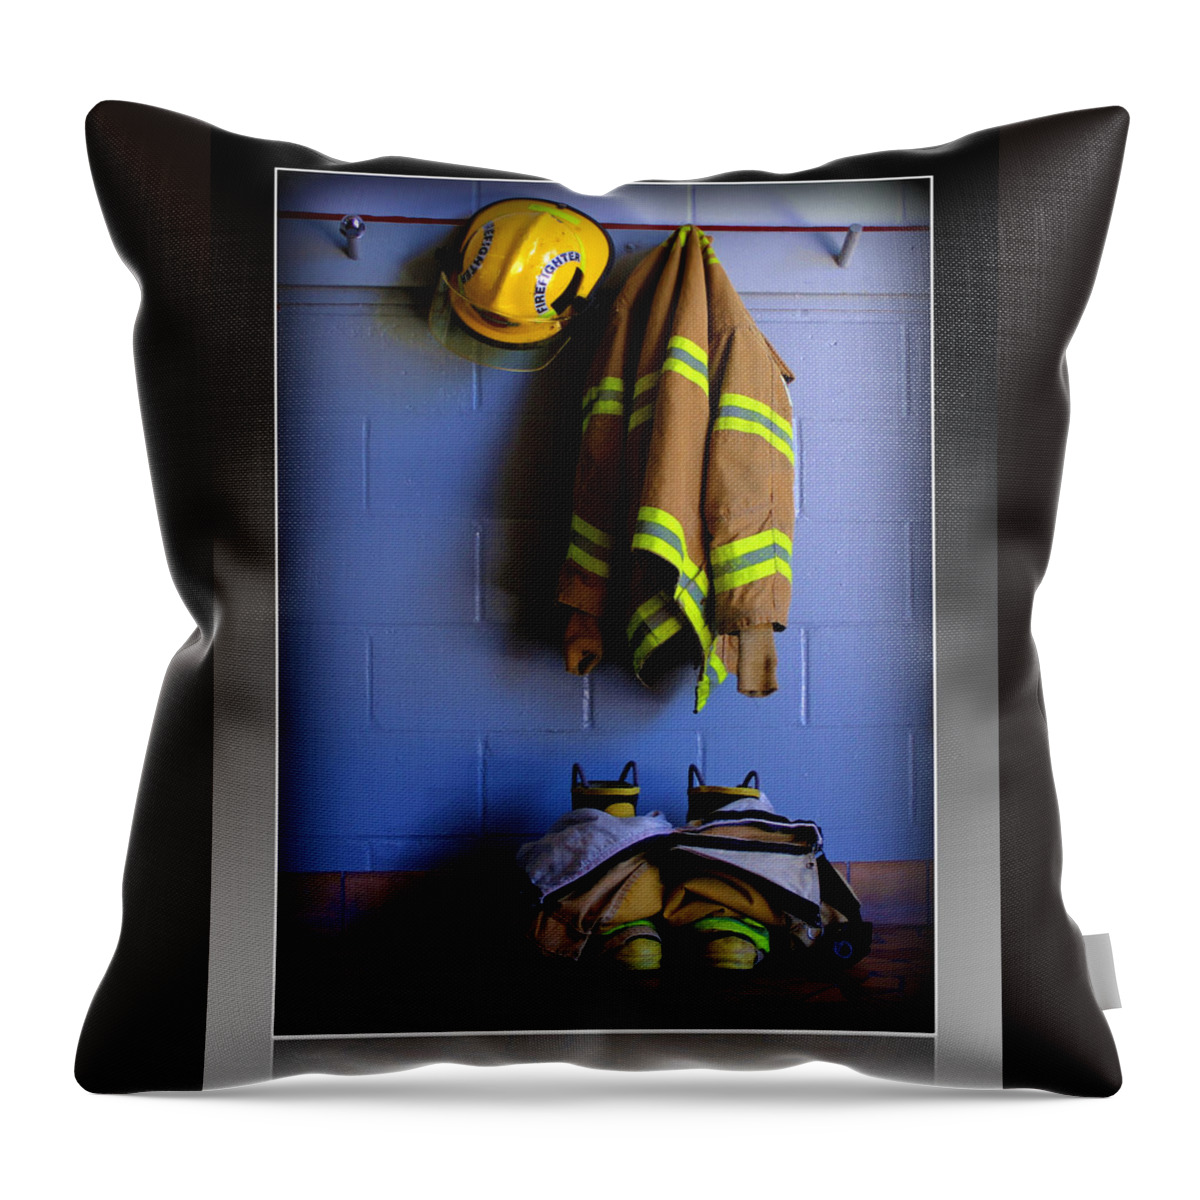 Fireman Throw Pillow featuring the photograph Protect and Serve by Farol Tomson